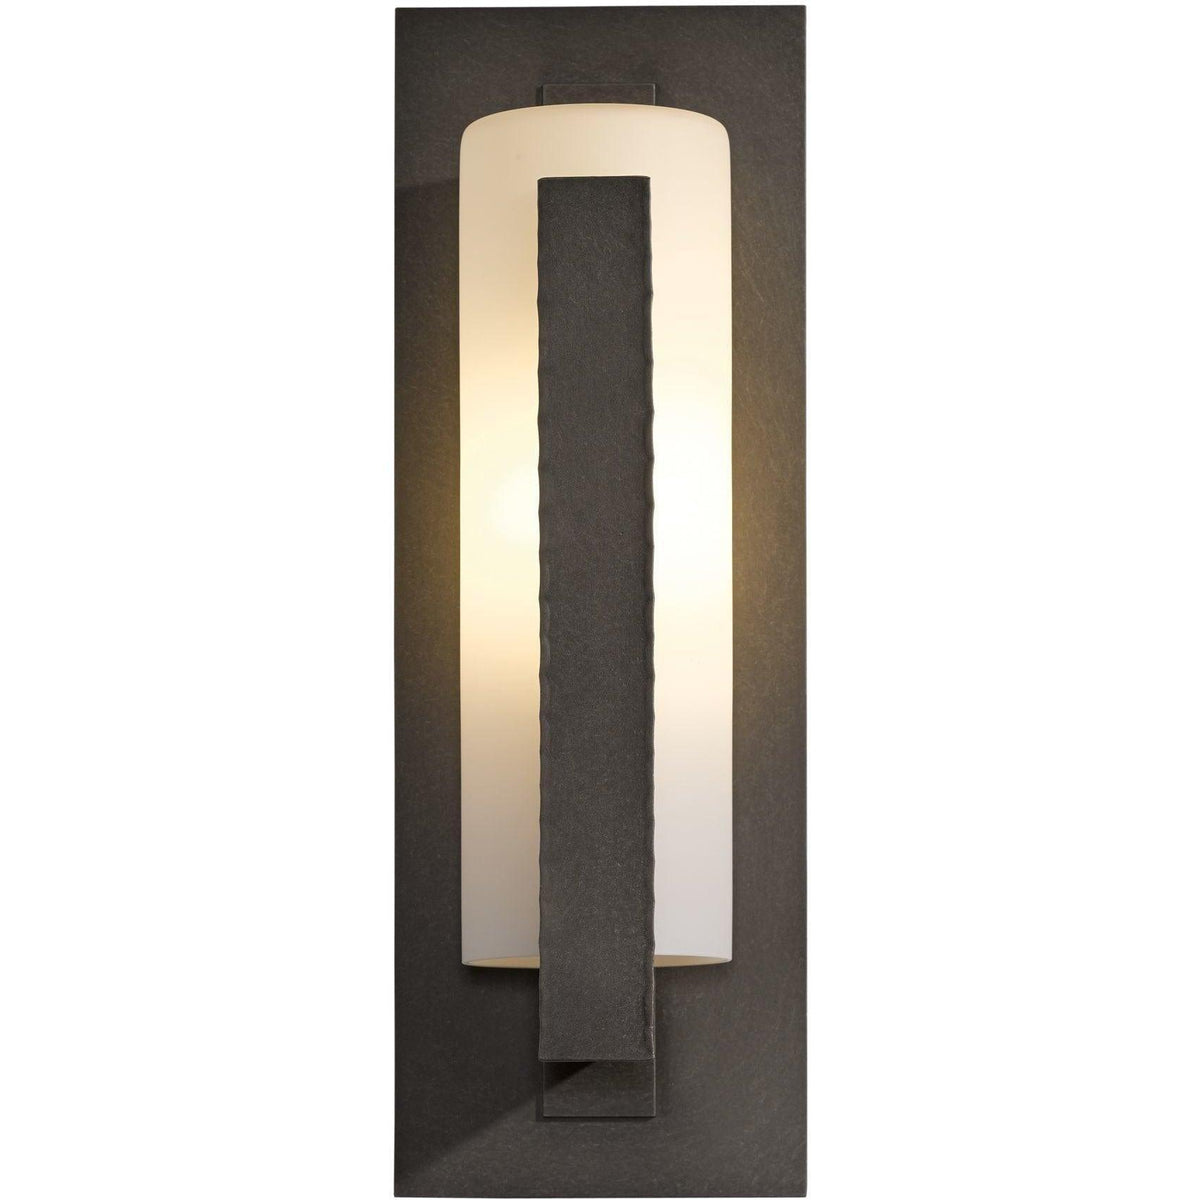 Hubbardton Forge - Forged 18-Inch Outdoor Wall Sconce - 307286-SKT-77-GG0034 | Montreal Lighting & Hardware